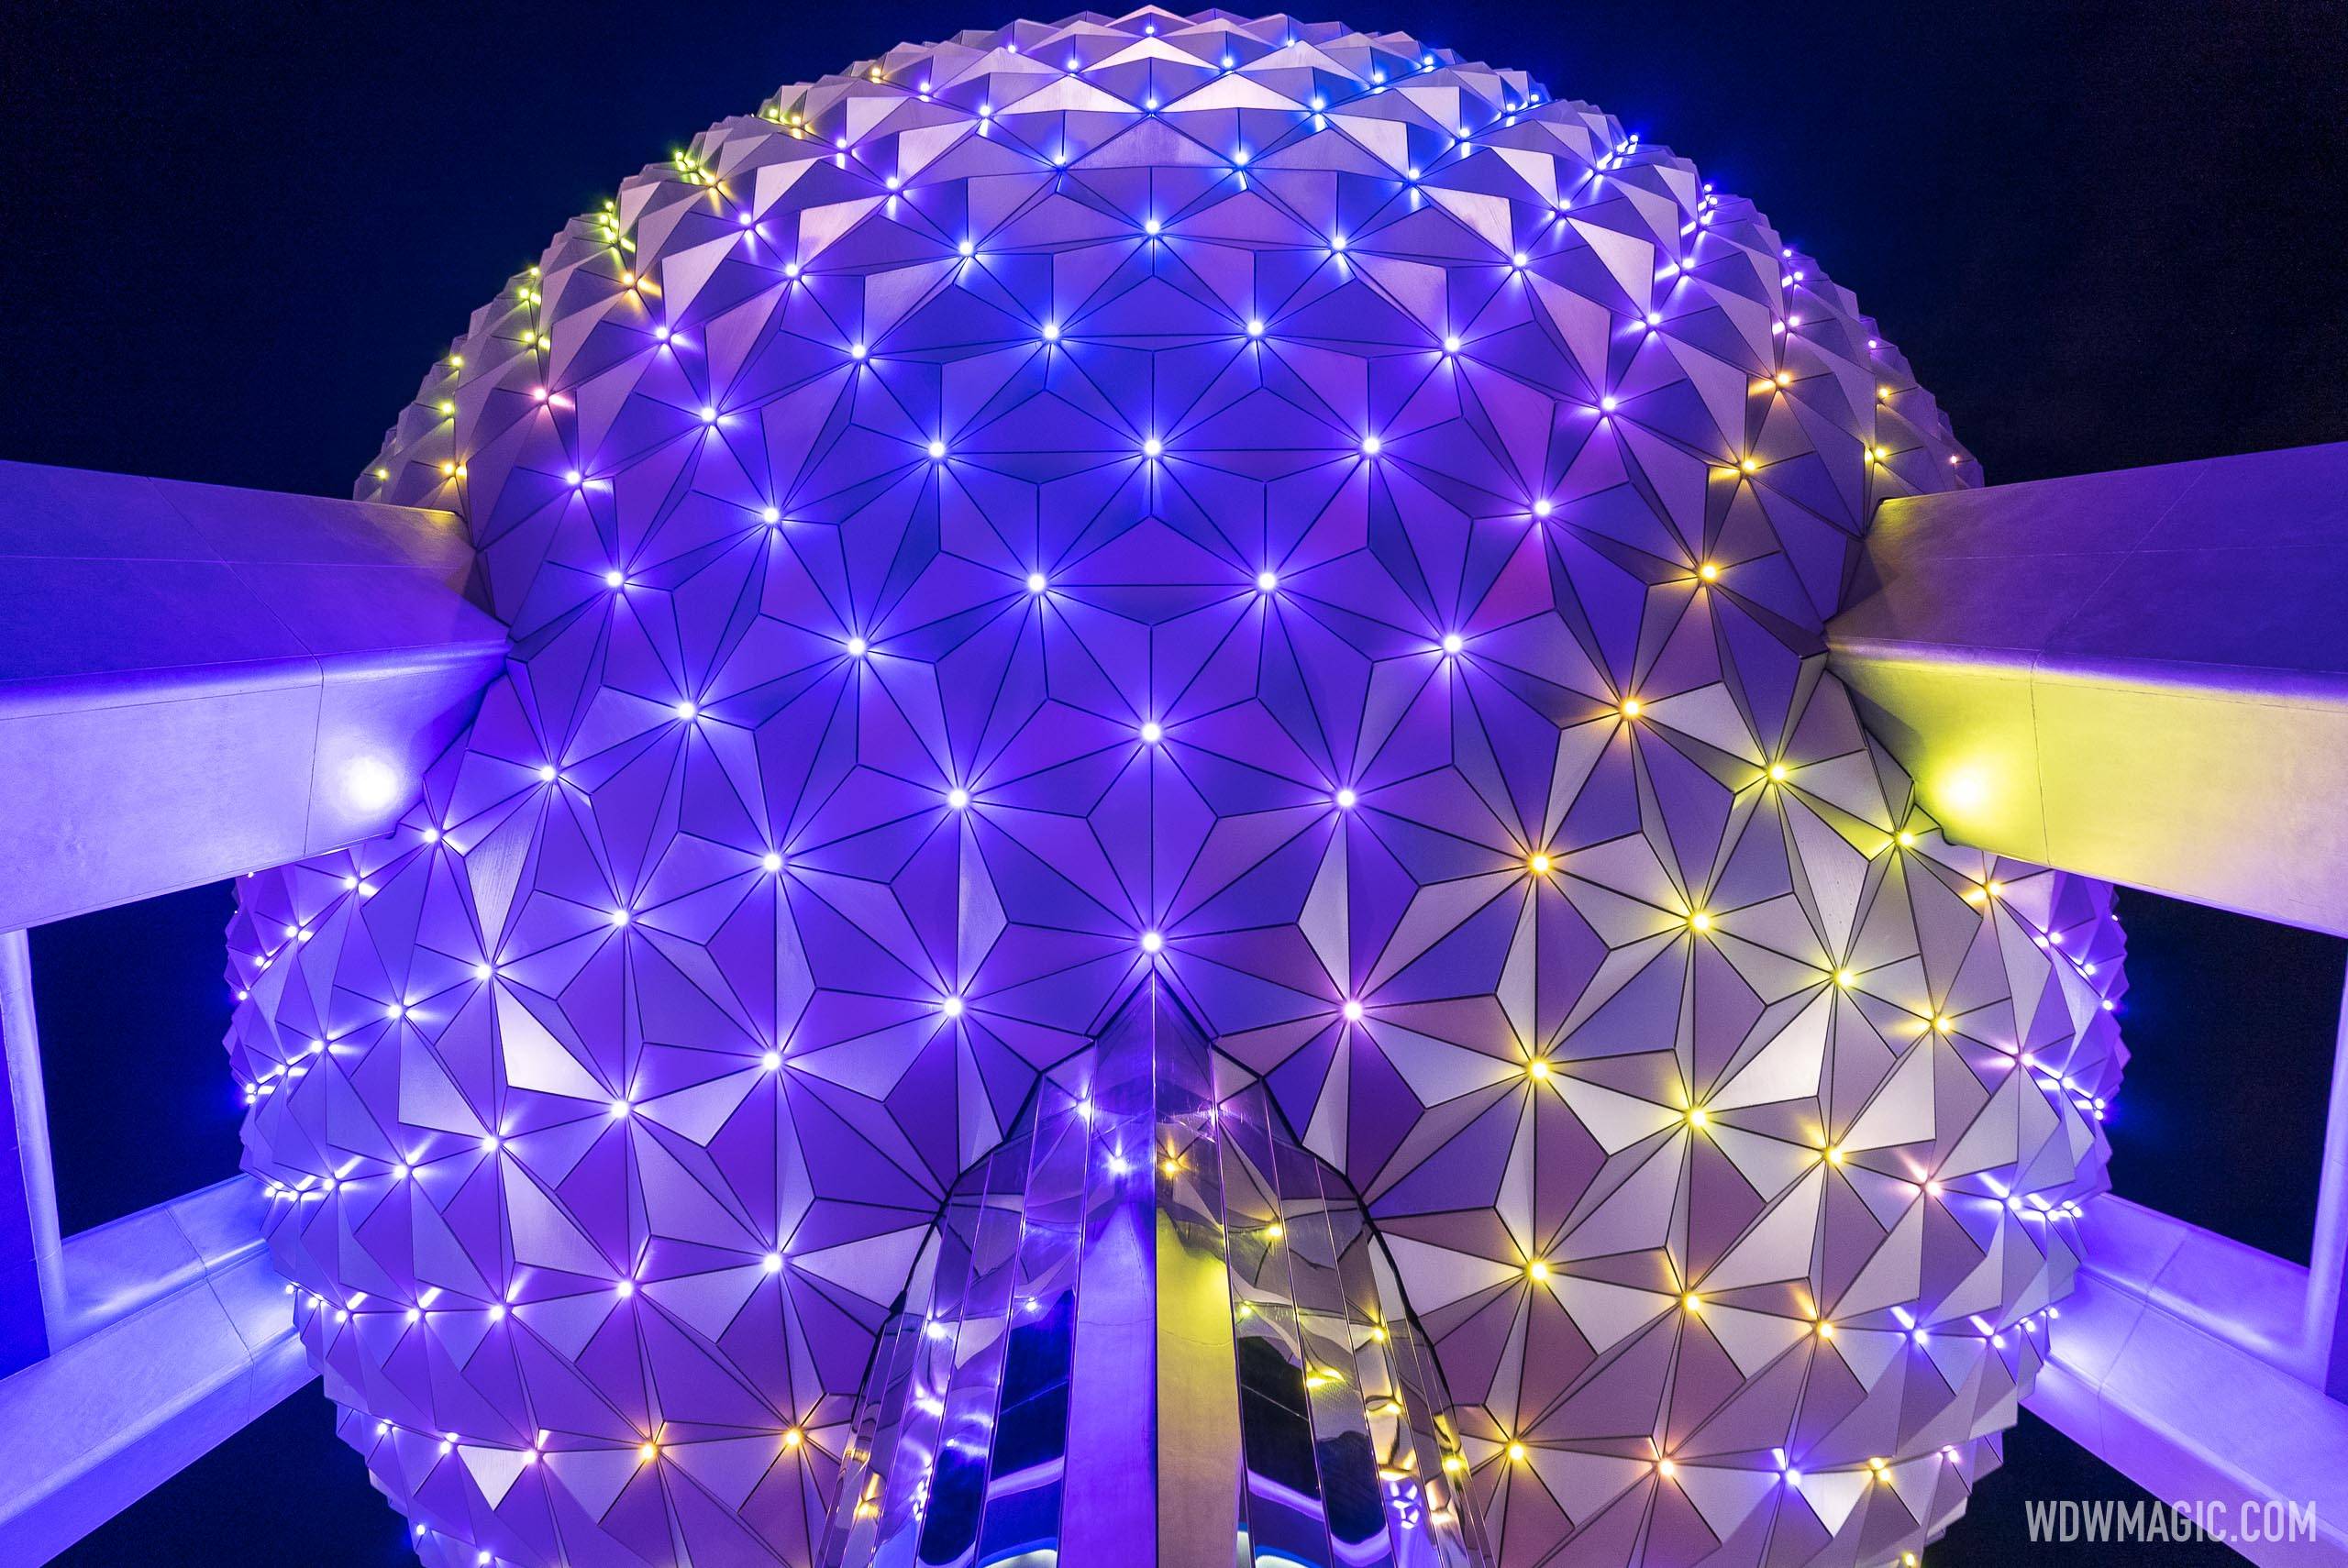 Spaceship Earth will feature a new lighting sequence for the EPCOT International Flower and Garden Festival